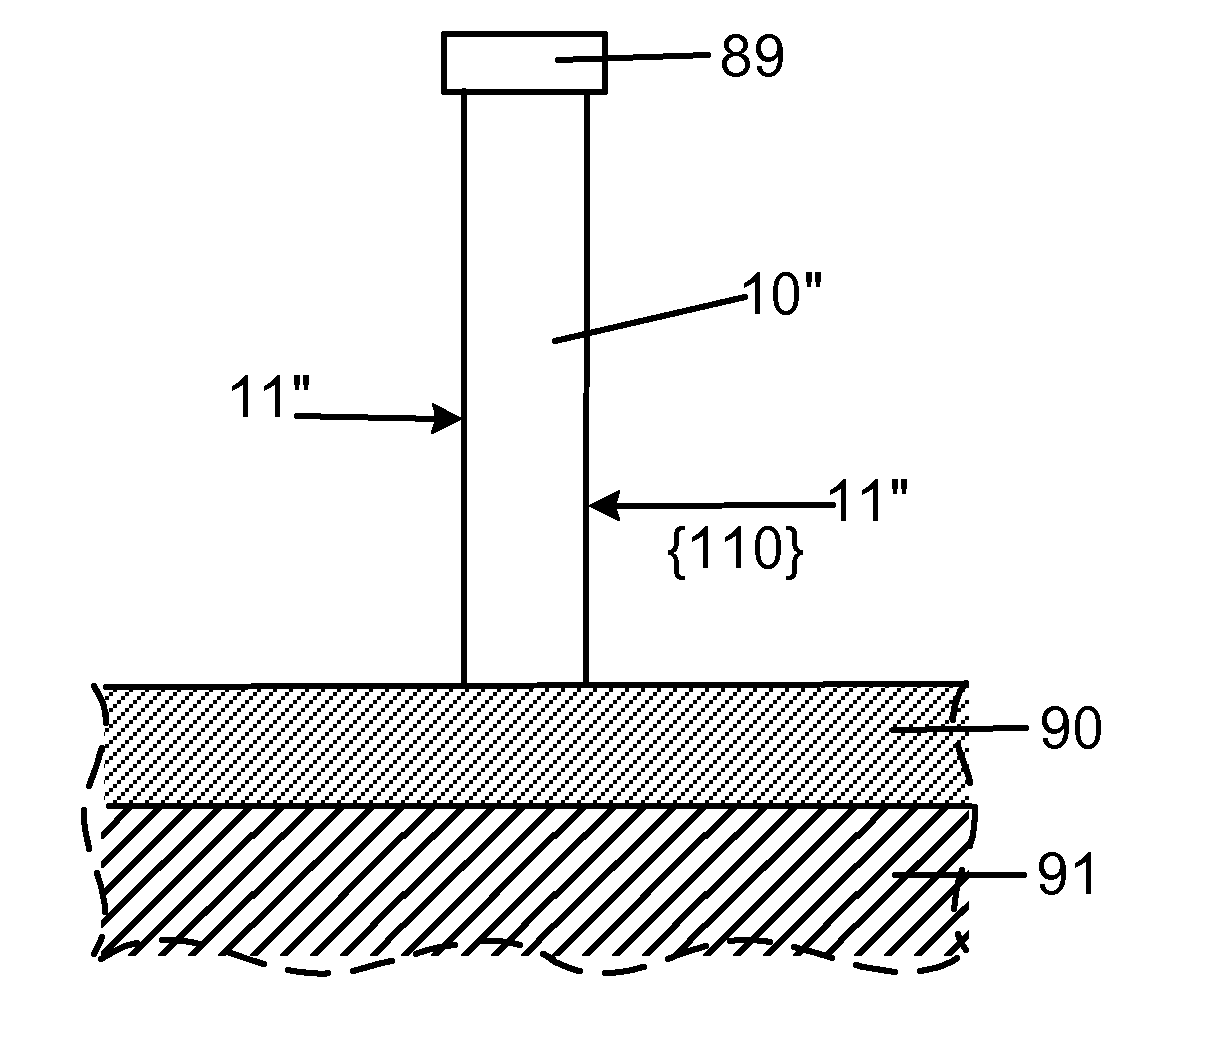 Smooth and vertical semiconductor fin structure